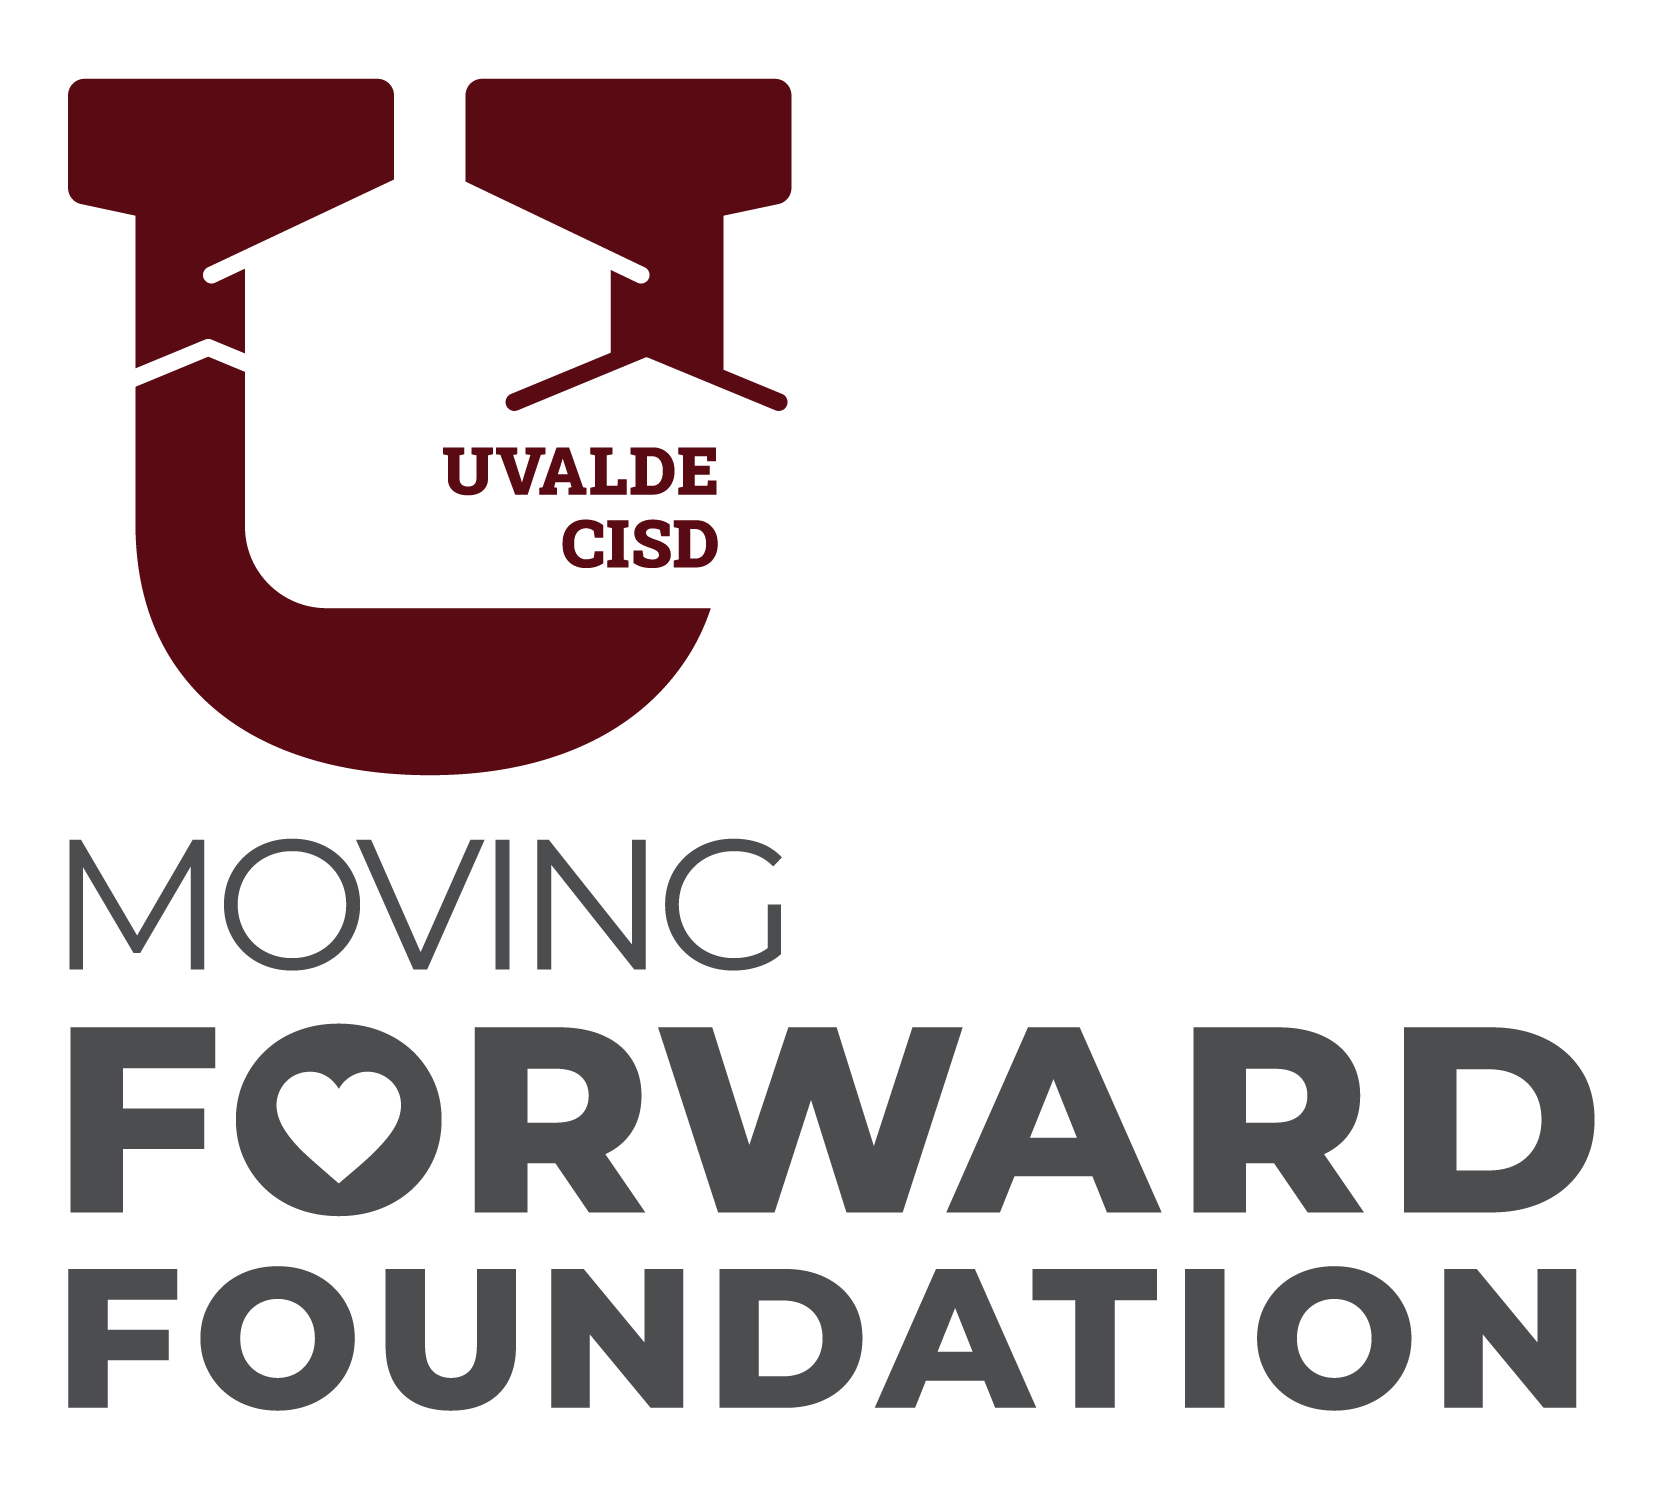 Square Uvalde CISD (maroon text) Moving Forward Foundation (grey text) logo with transparent background.